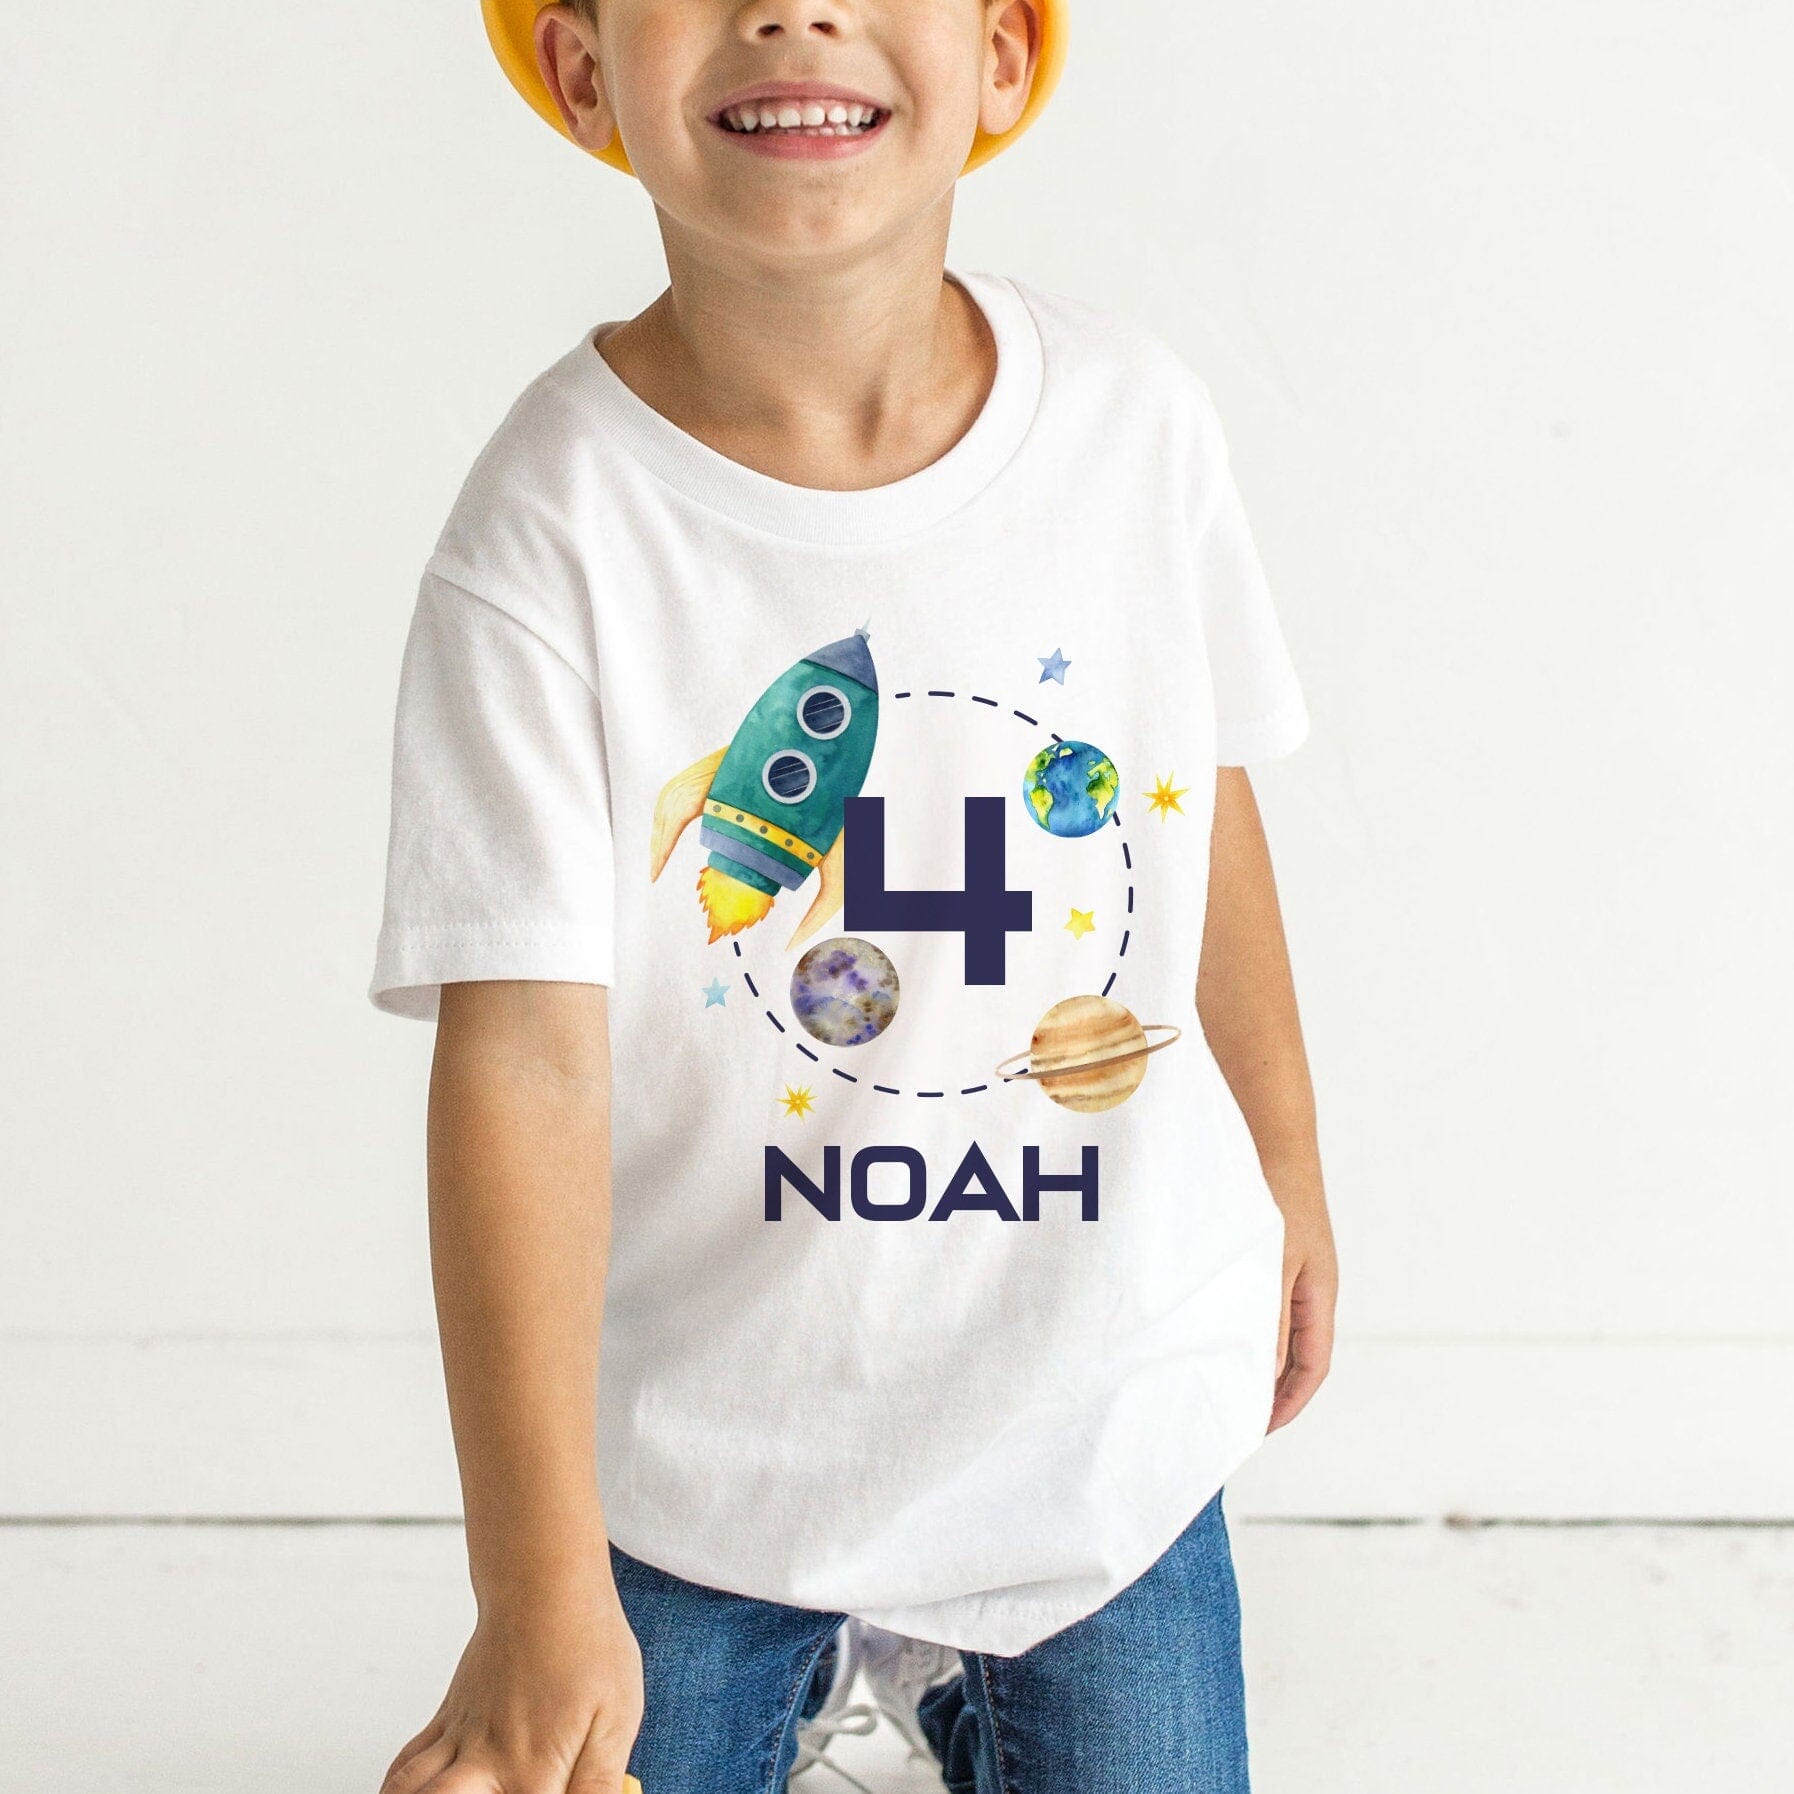 Personalised Space and Rocket Kids Birthday T-shirt, Birthday Boy Girl T shirt Top, Gift Cute Themed